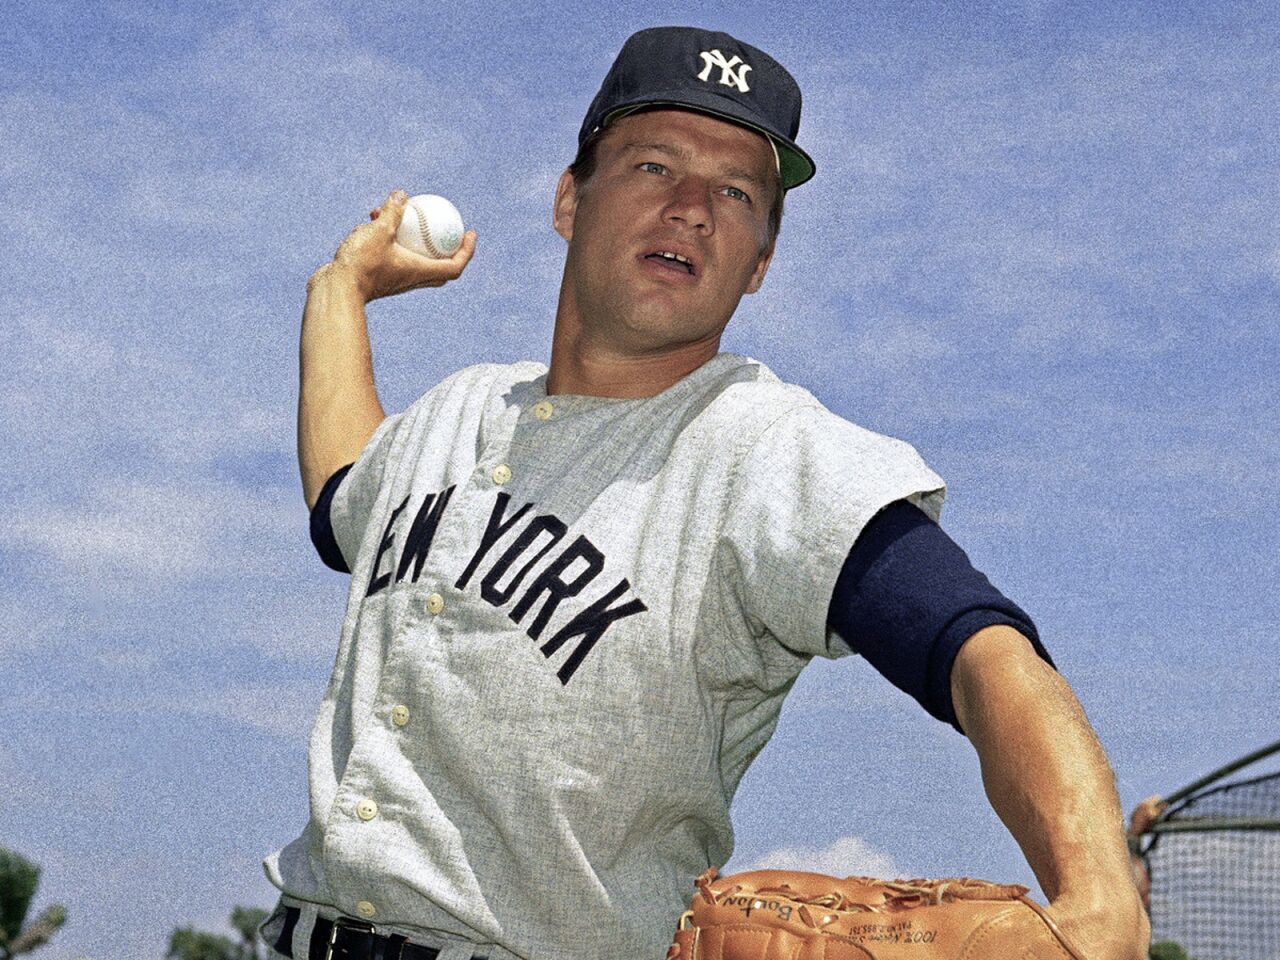 Former New York Yankees pitcher Jim Bouton's tell-all book “Ball Four,” which detailed Mickey Mantle’s carousing and the use of stimulants in the major leagues, shocked and angered the baseball world. The right-hander was an All-Star in 1963, going 21-8 with six shutouts, but he finished his 10-year career with a 62-63 record and 3.57 ERA. He was 80.